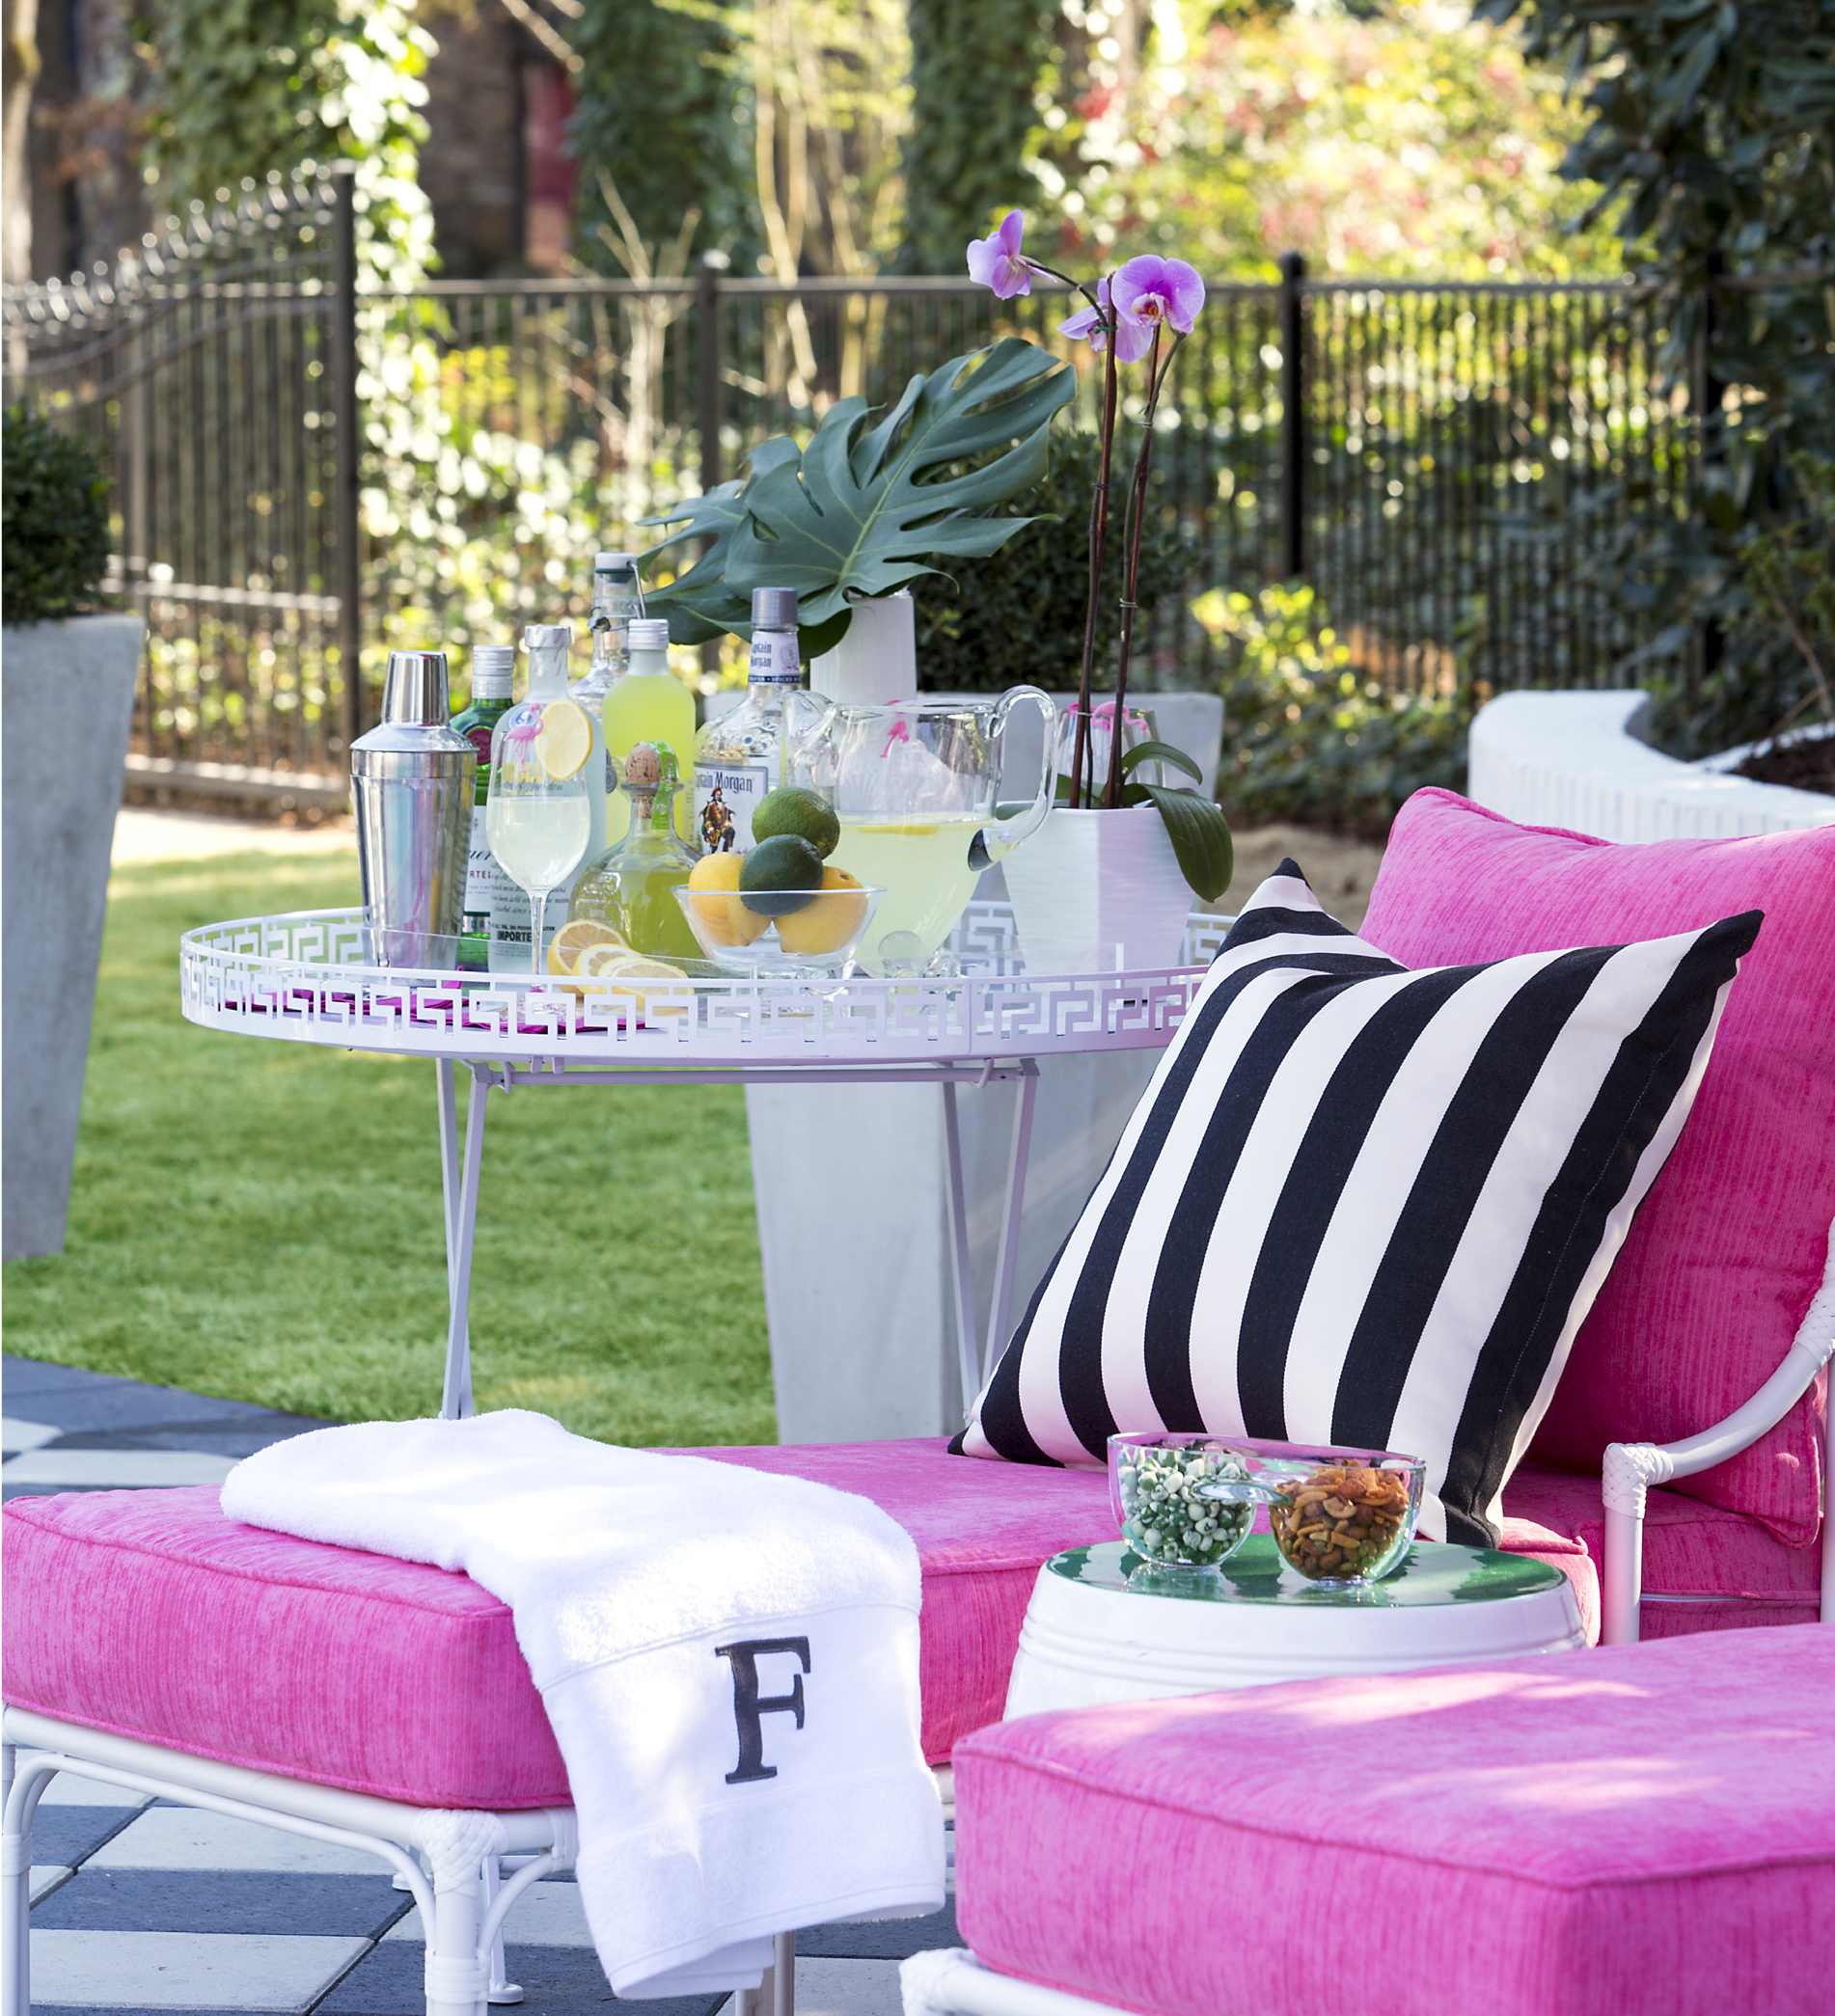 Outdoor Patio Furniture with Bright Colored Cushions